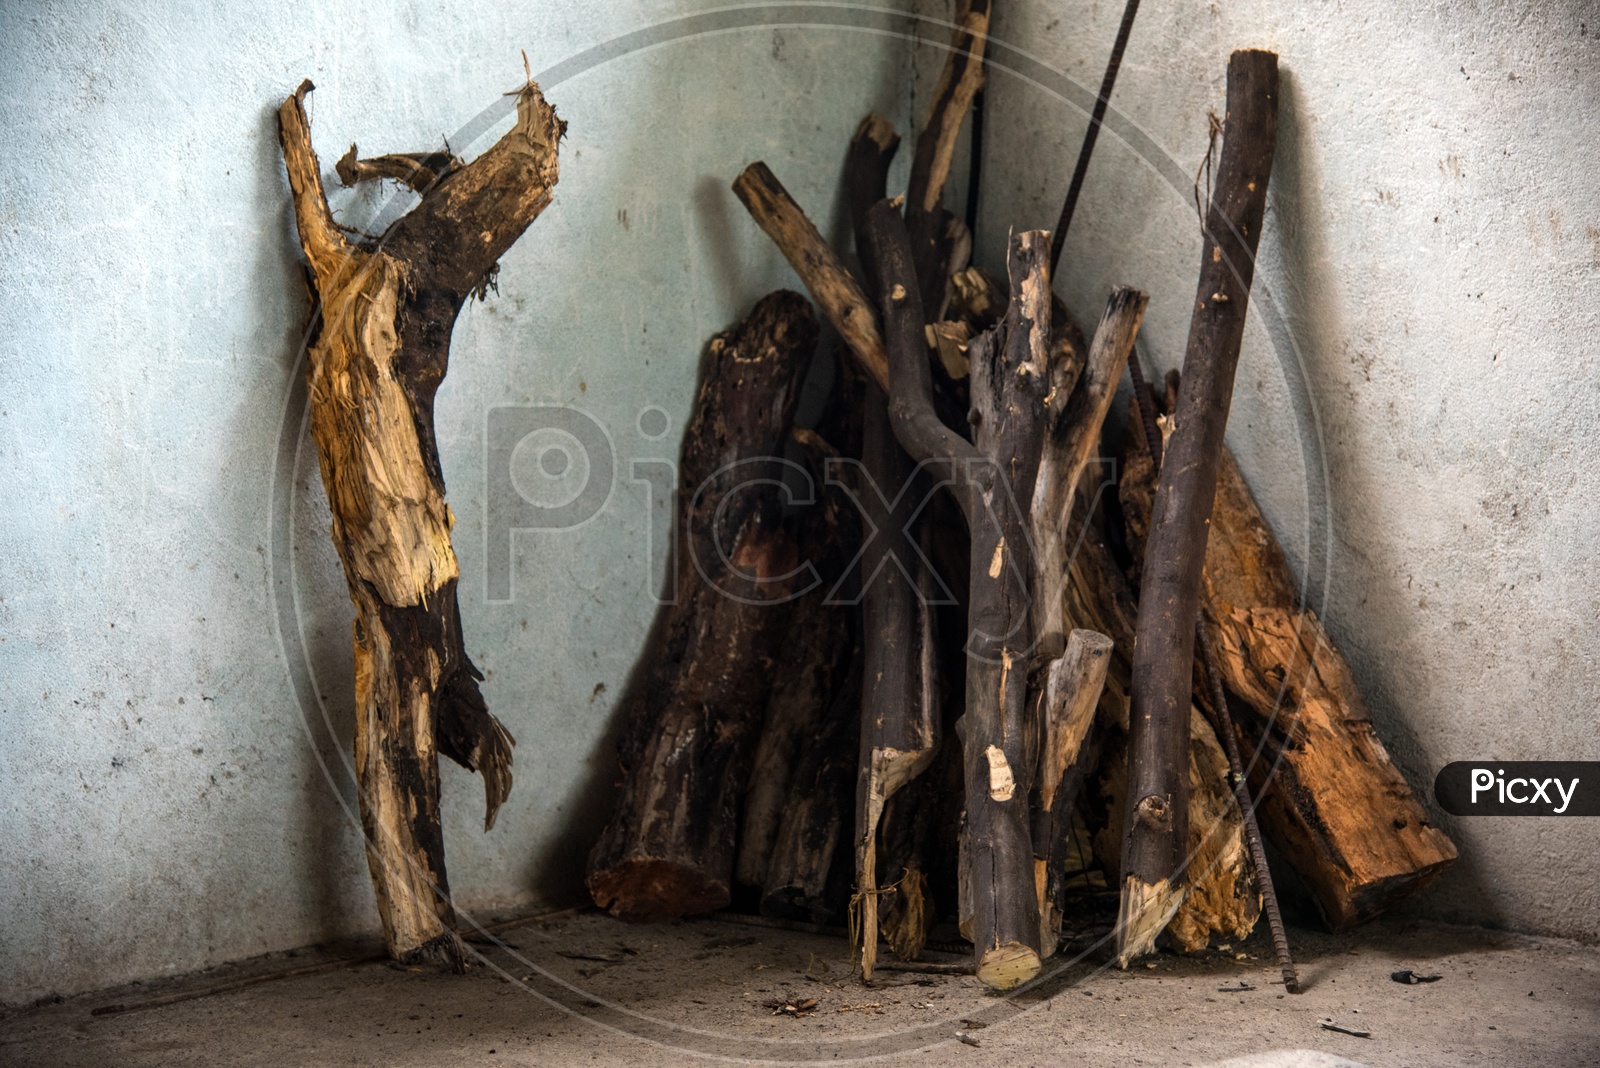 Dried Wood  Stored In a Rural Village  Used as a Cooking Fuel